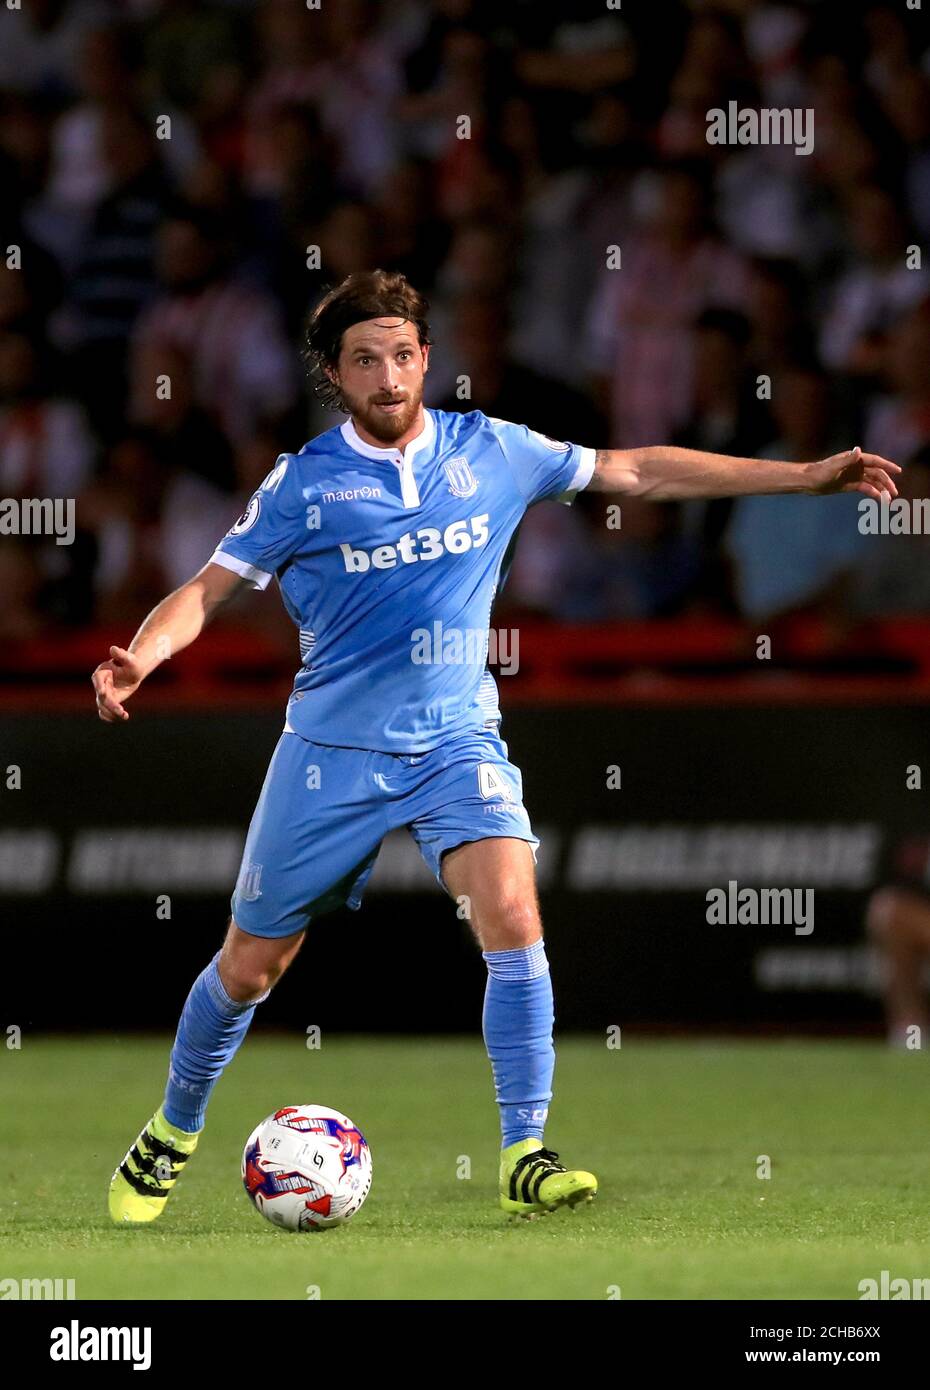 Stoke City's Joe Allen during the EFL Cup, Second Round match at the Lamex Stadium, Stevenage. PRESS ASSOCIATION Photo. Picture date: Tuesday August 23, 2016. See PA story SOCCER Stevenage. Photo credit should read: Tim Goode/PA Wire. RESTRICTIONS: No use with unauthorised audio, video, data, fixture lists, club/league logos or 'live' services. Online in-match use limited to 75 images, no video emulation. No use in betting, games or single club/league/player publications. Stock Photo